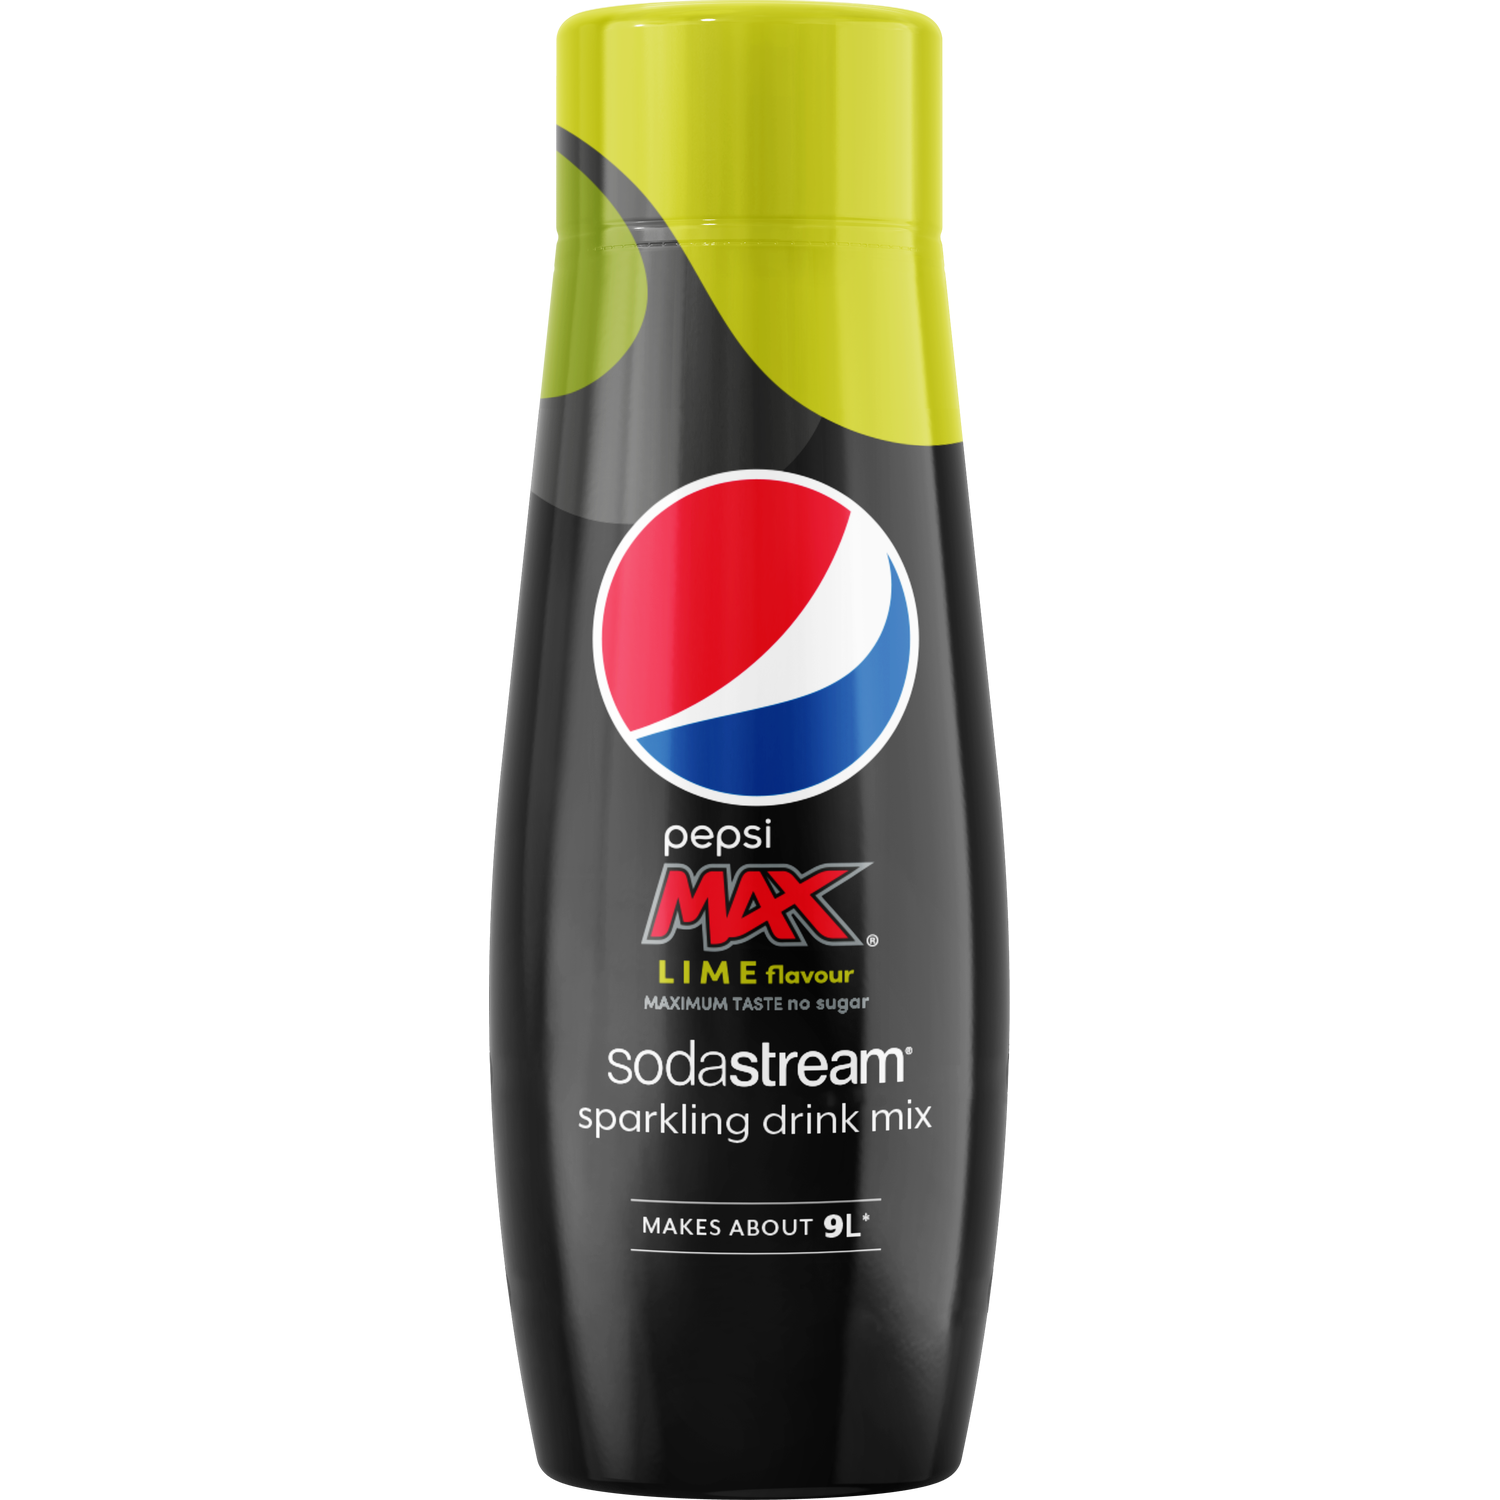 SodaStream Max Lime Pepsi Flavour Sparkling Drink Mix Image